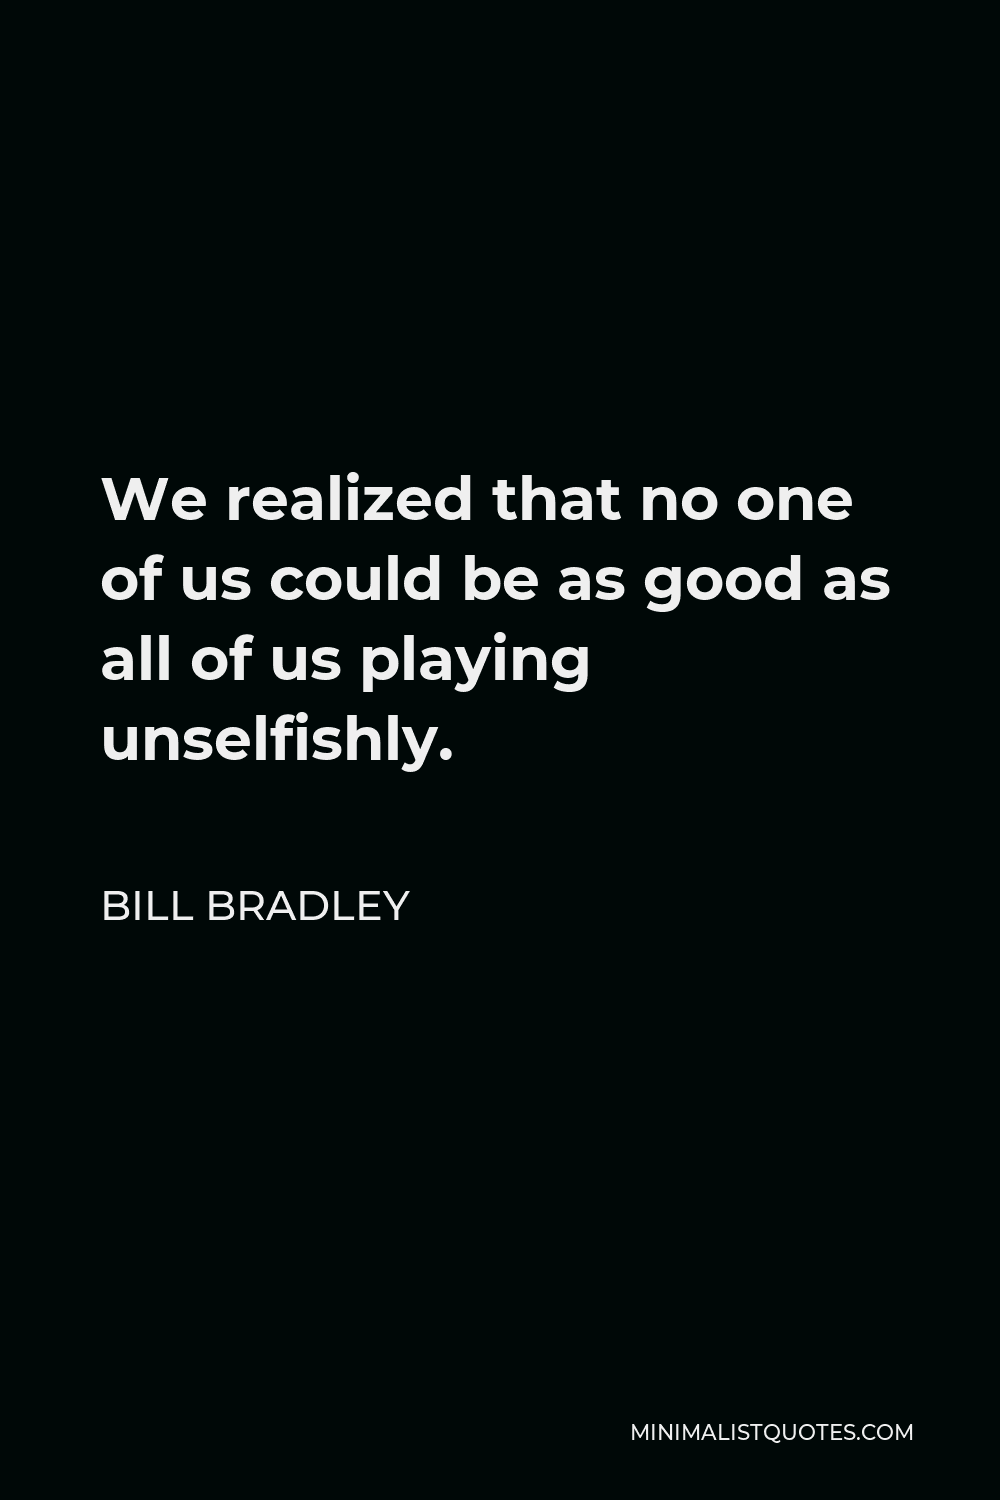 Bill Bradley Quote - We realized that no one of us could be as good as all of us playing unselfishly.